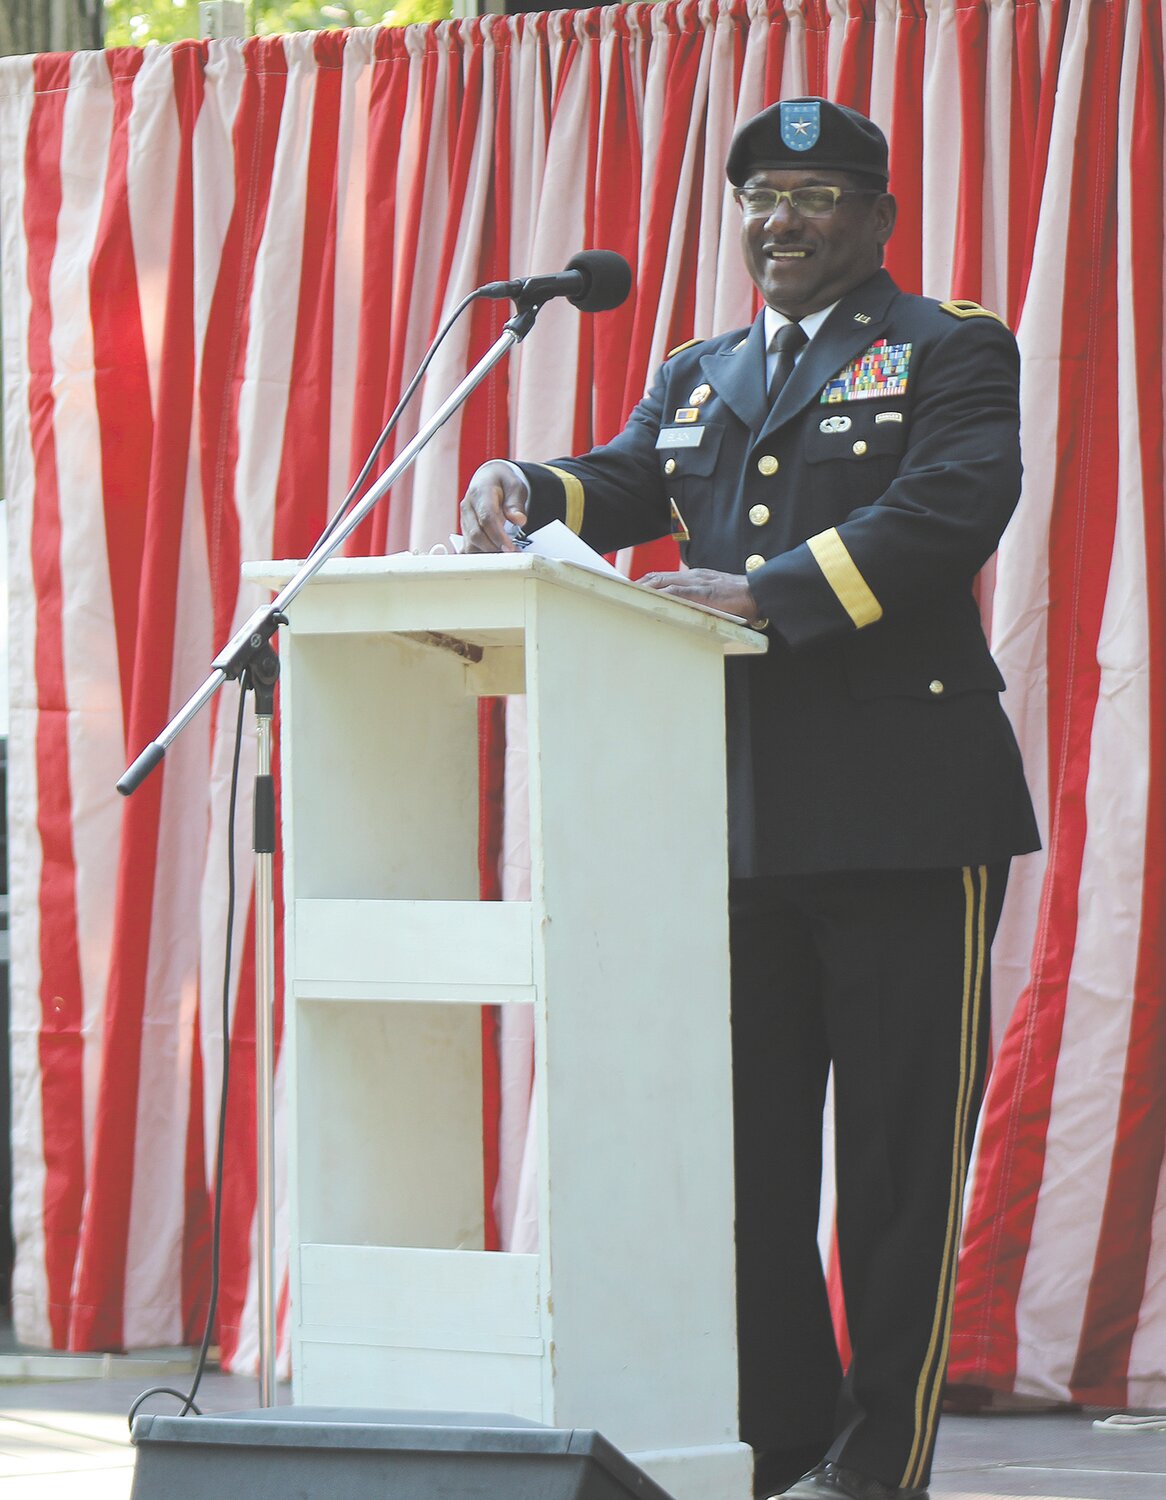 Wayne Black, a retired Brigadier General and Assistant Adjutant General of the Indiana Army National Guard, was a guest speaker during the Tribute to Local Heroes during the Crawfordsville Strawberry Festival on Friday.